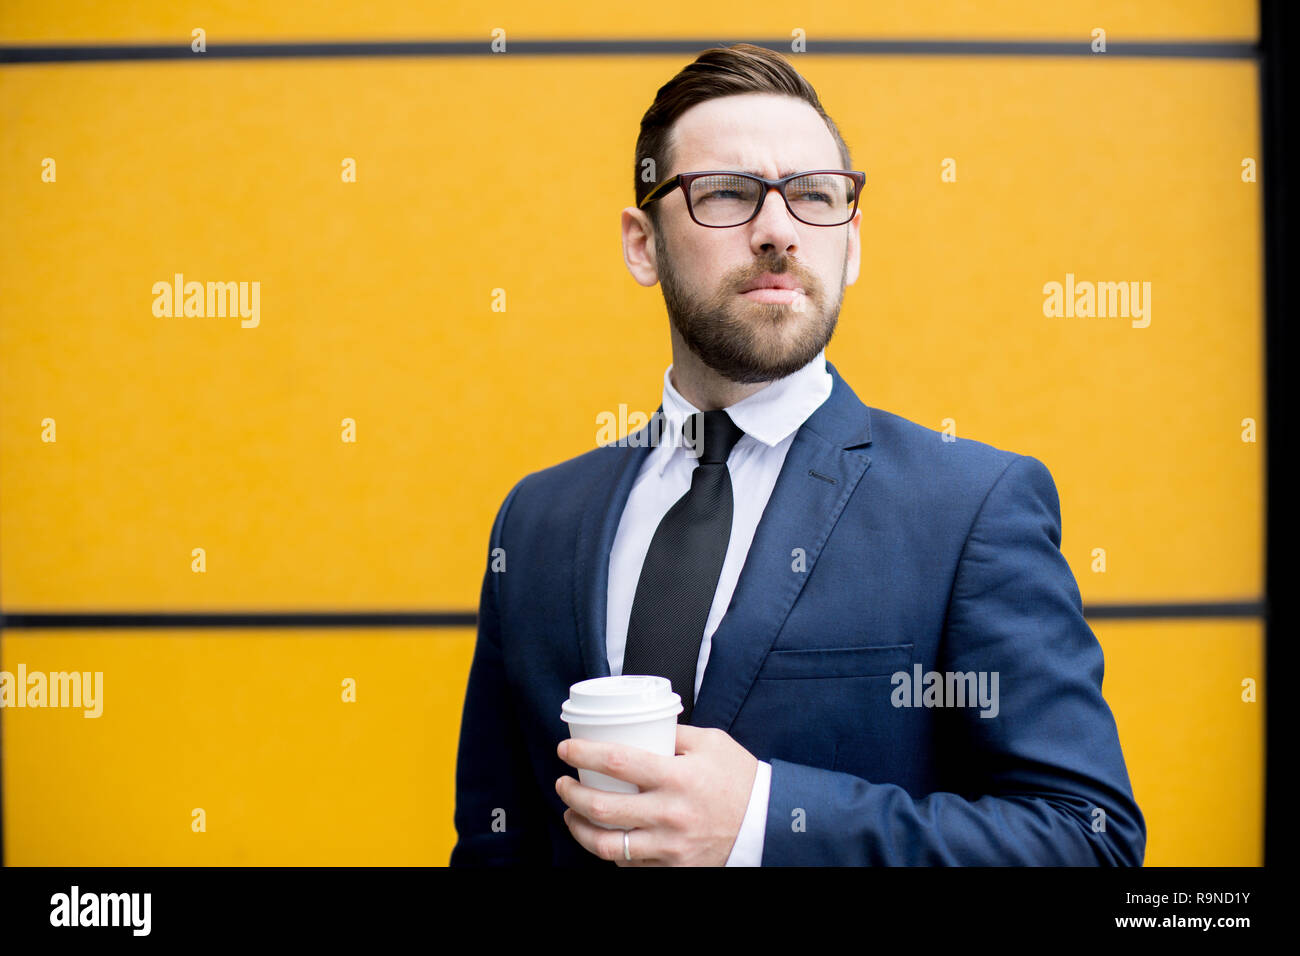 Handsome man holding cup of hot drink  Stock Photo